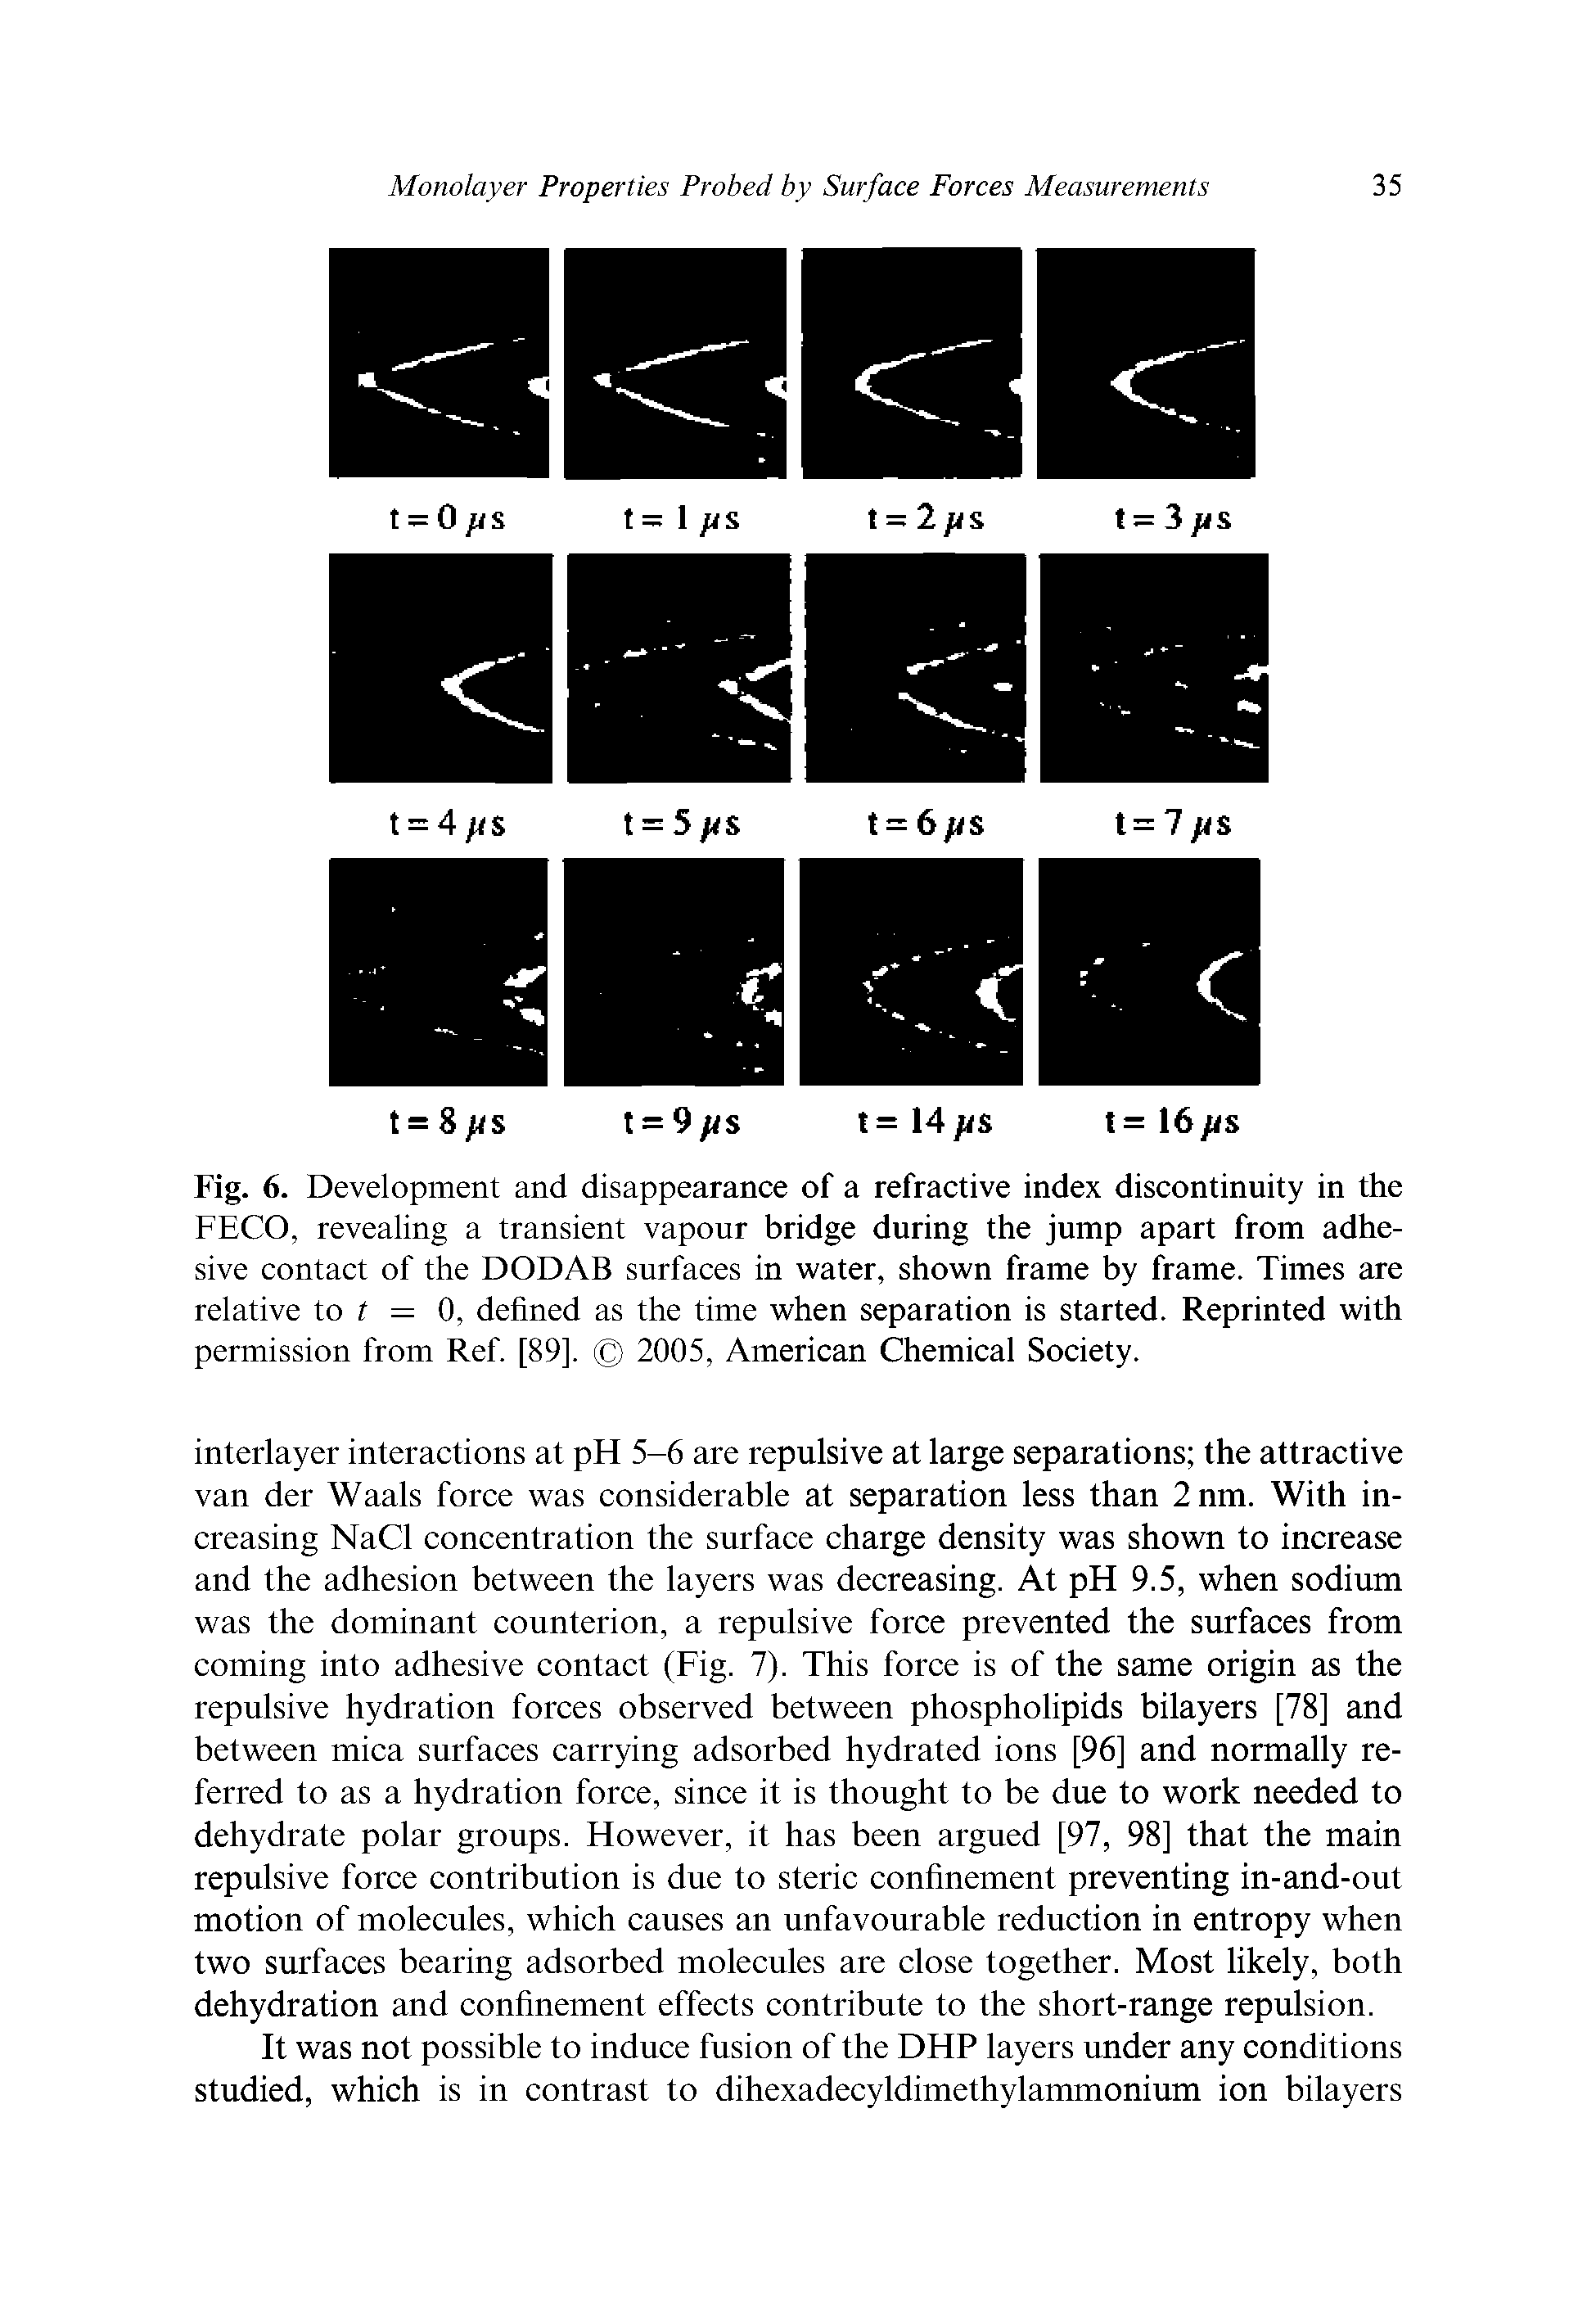 Fig. 6. Development and disappearance of a refractive index discontinuity in the FECO, revealing a transient vapour bridge during the jump apart from adhesive contact of the DODAB surfaces in water, shown frame by frame. Times are relative to t — 0, defined as the time when separation is started. Reprinted with permission from Ref. [89]. 2005, American Chemical Society.